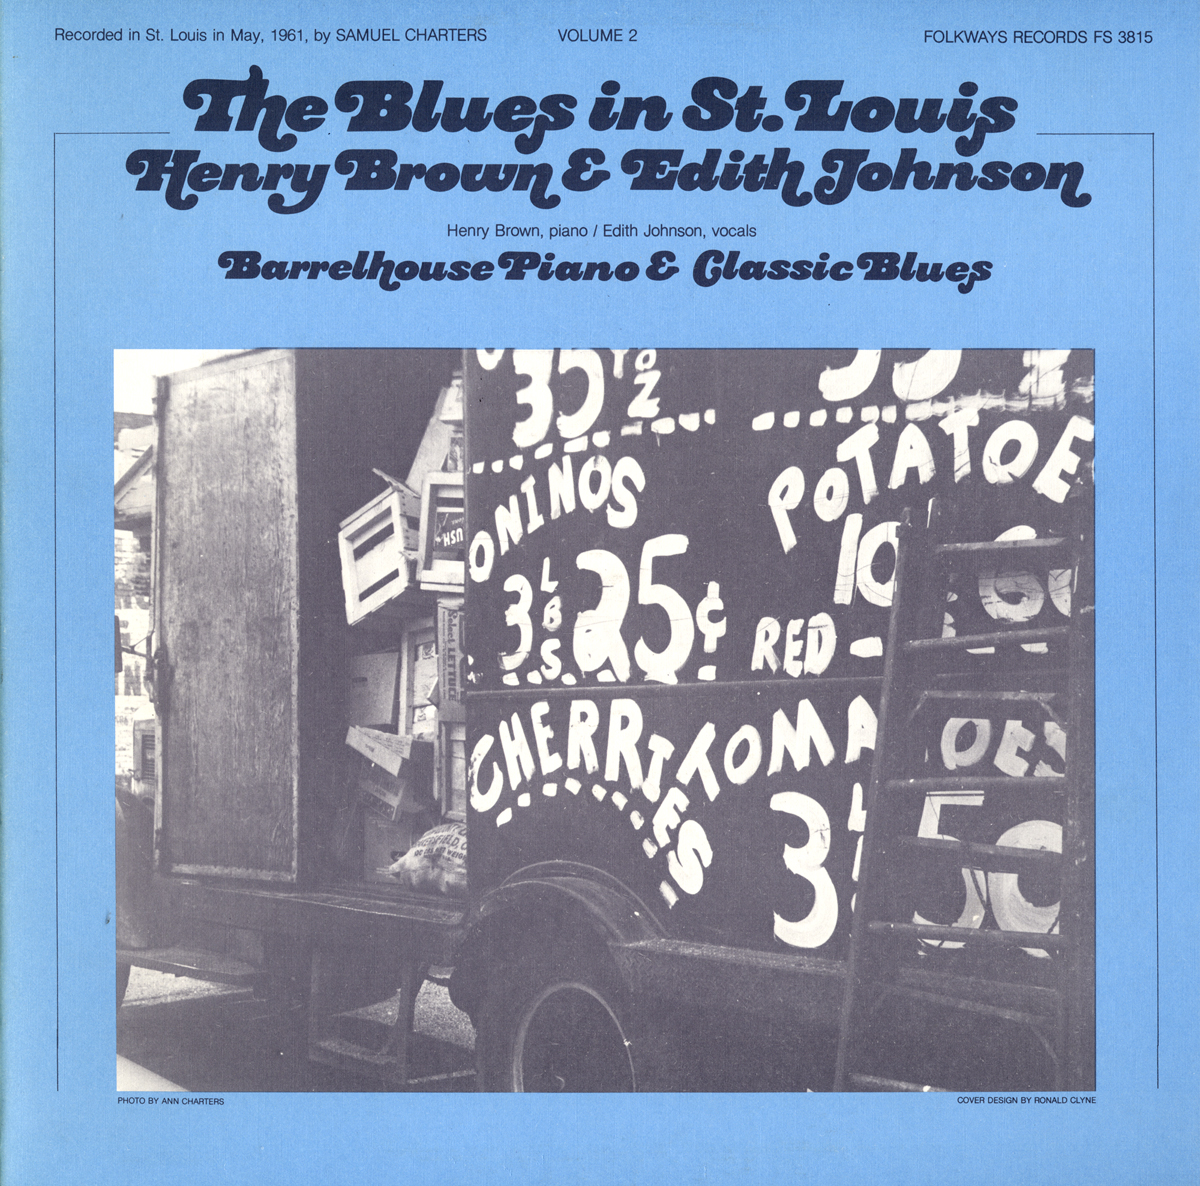 BLUES IN ST. LOUIS 2: HENRY BROWN& EDITH JOHNSON